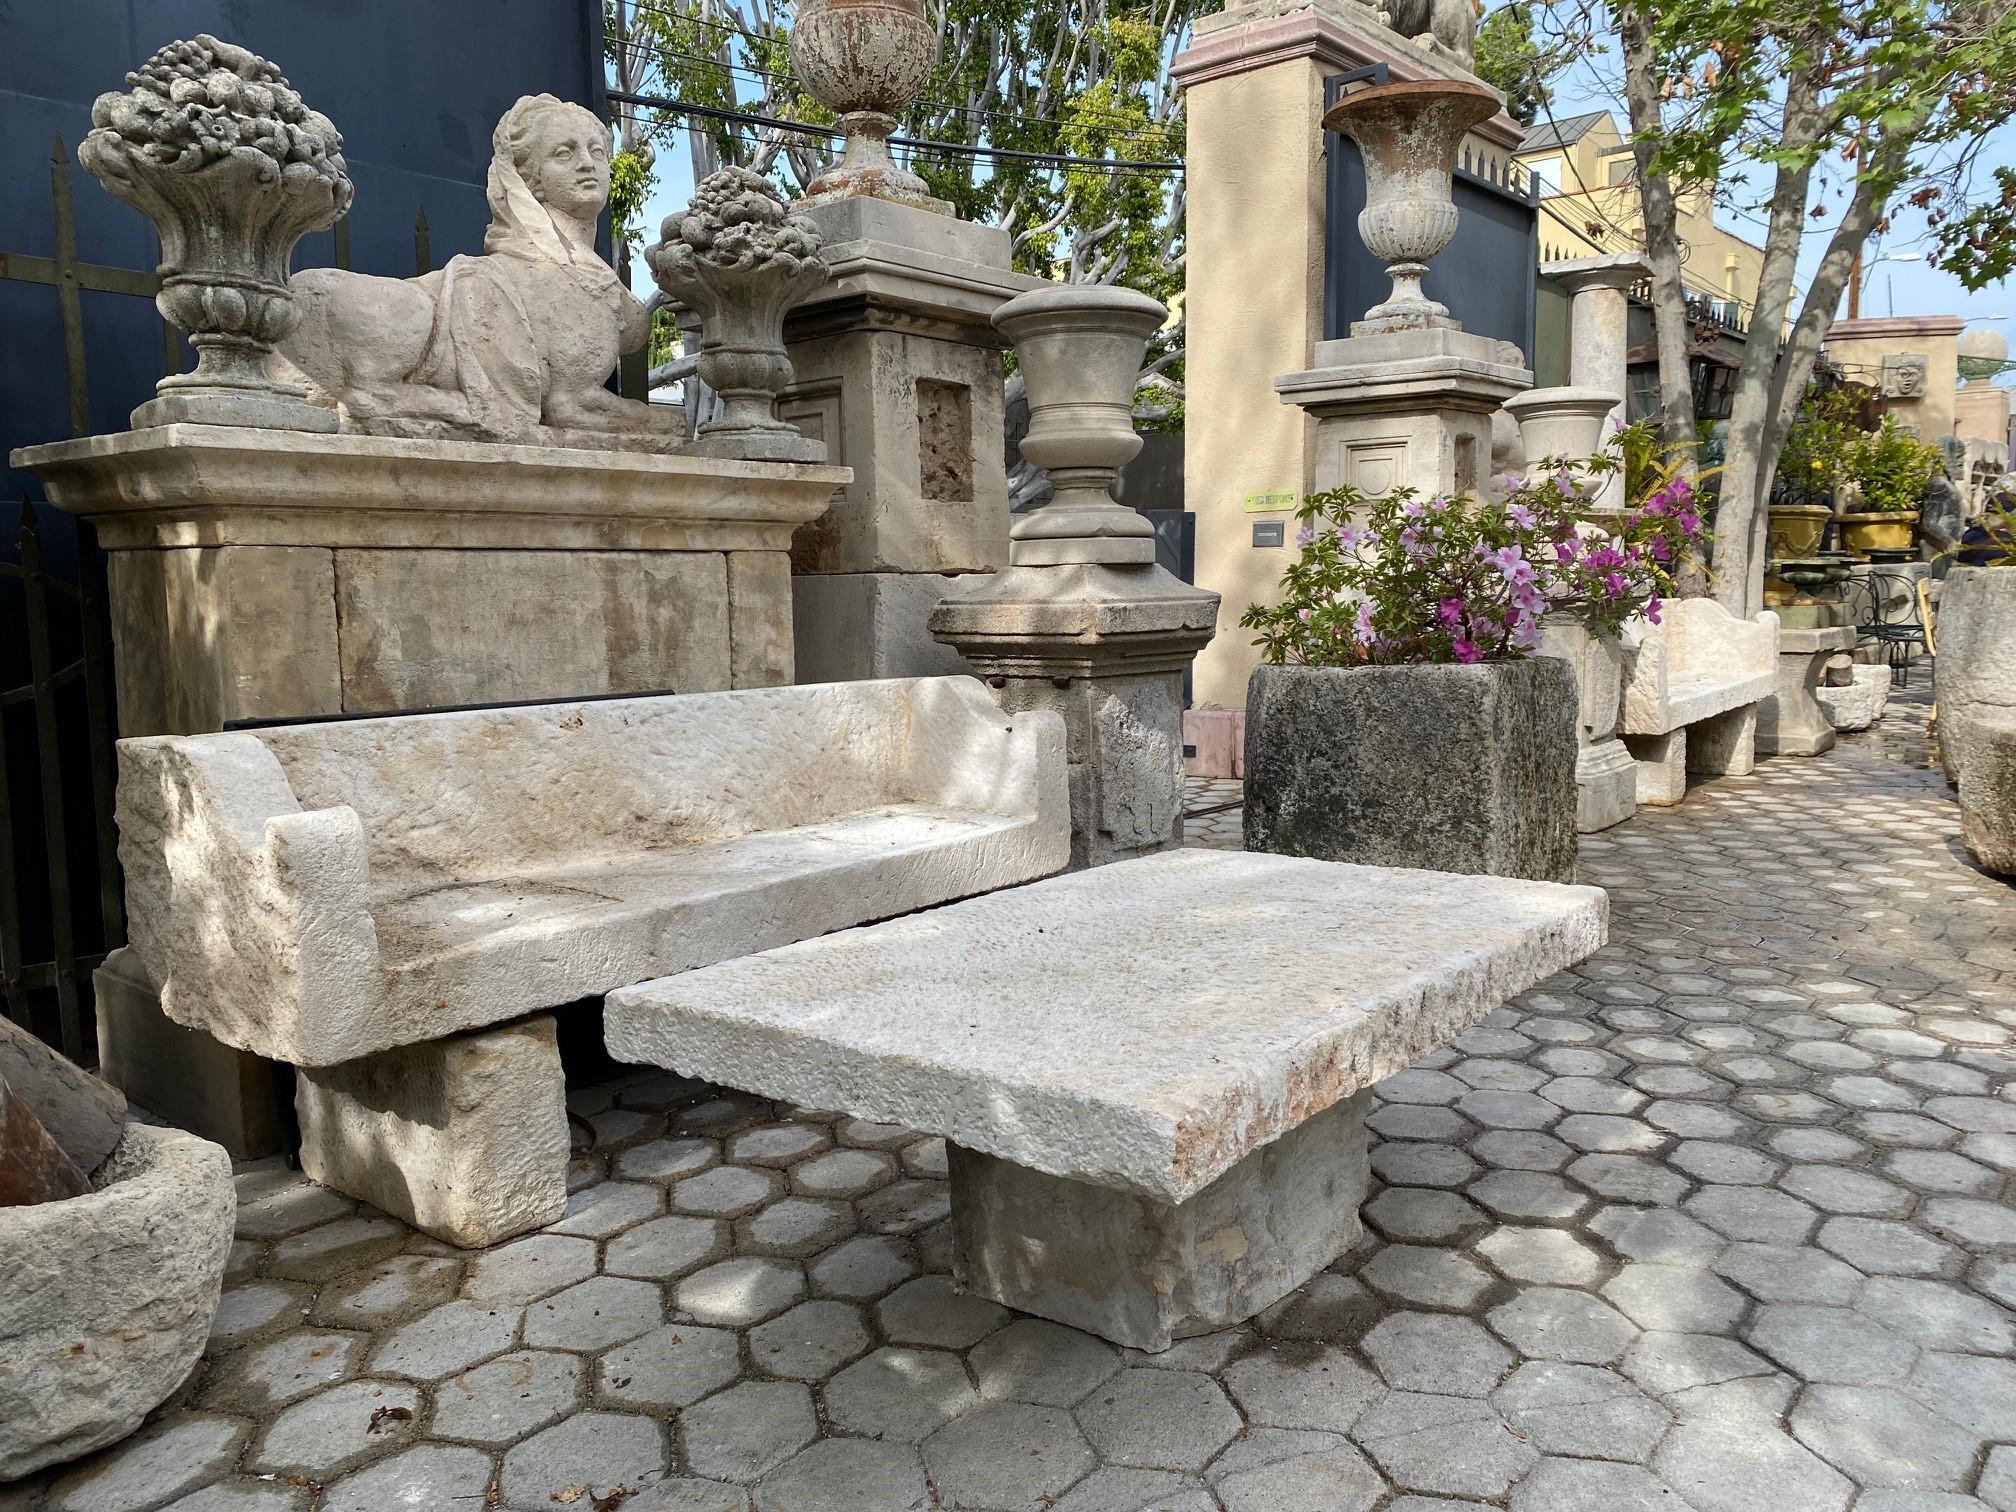 18th century hand carved stone antique elements garden low coffee Farm table on simple a single carved stone base pedestal.
It will be the perfect touch by an outdoor fireplace, This table has a lot of charm and character. It can work in a